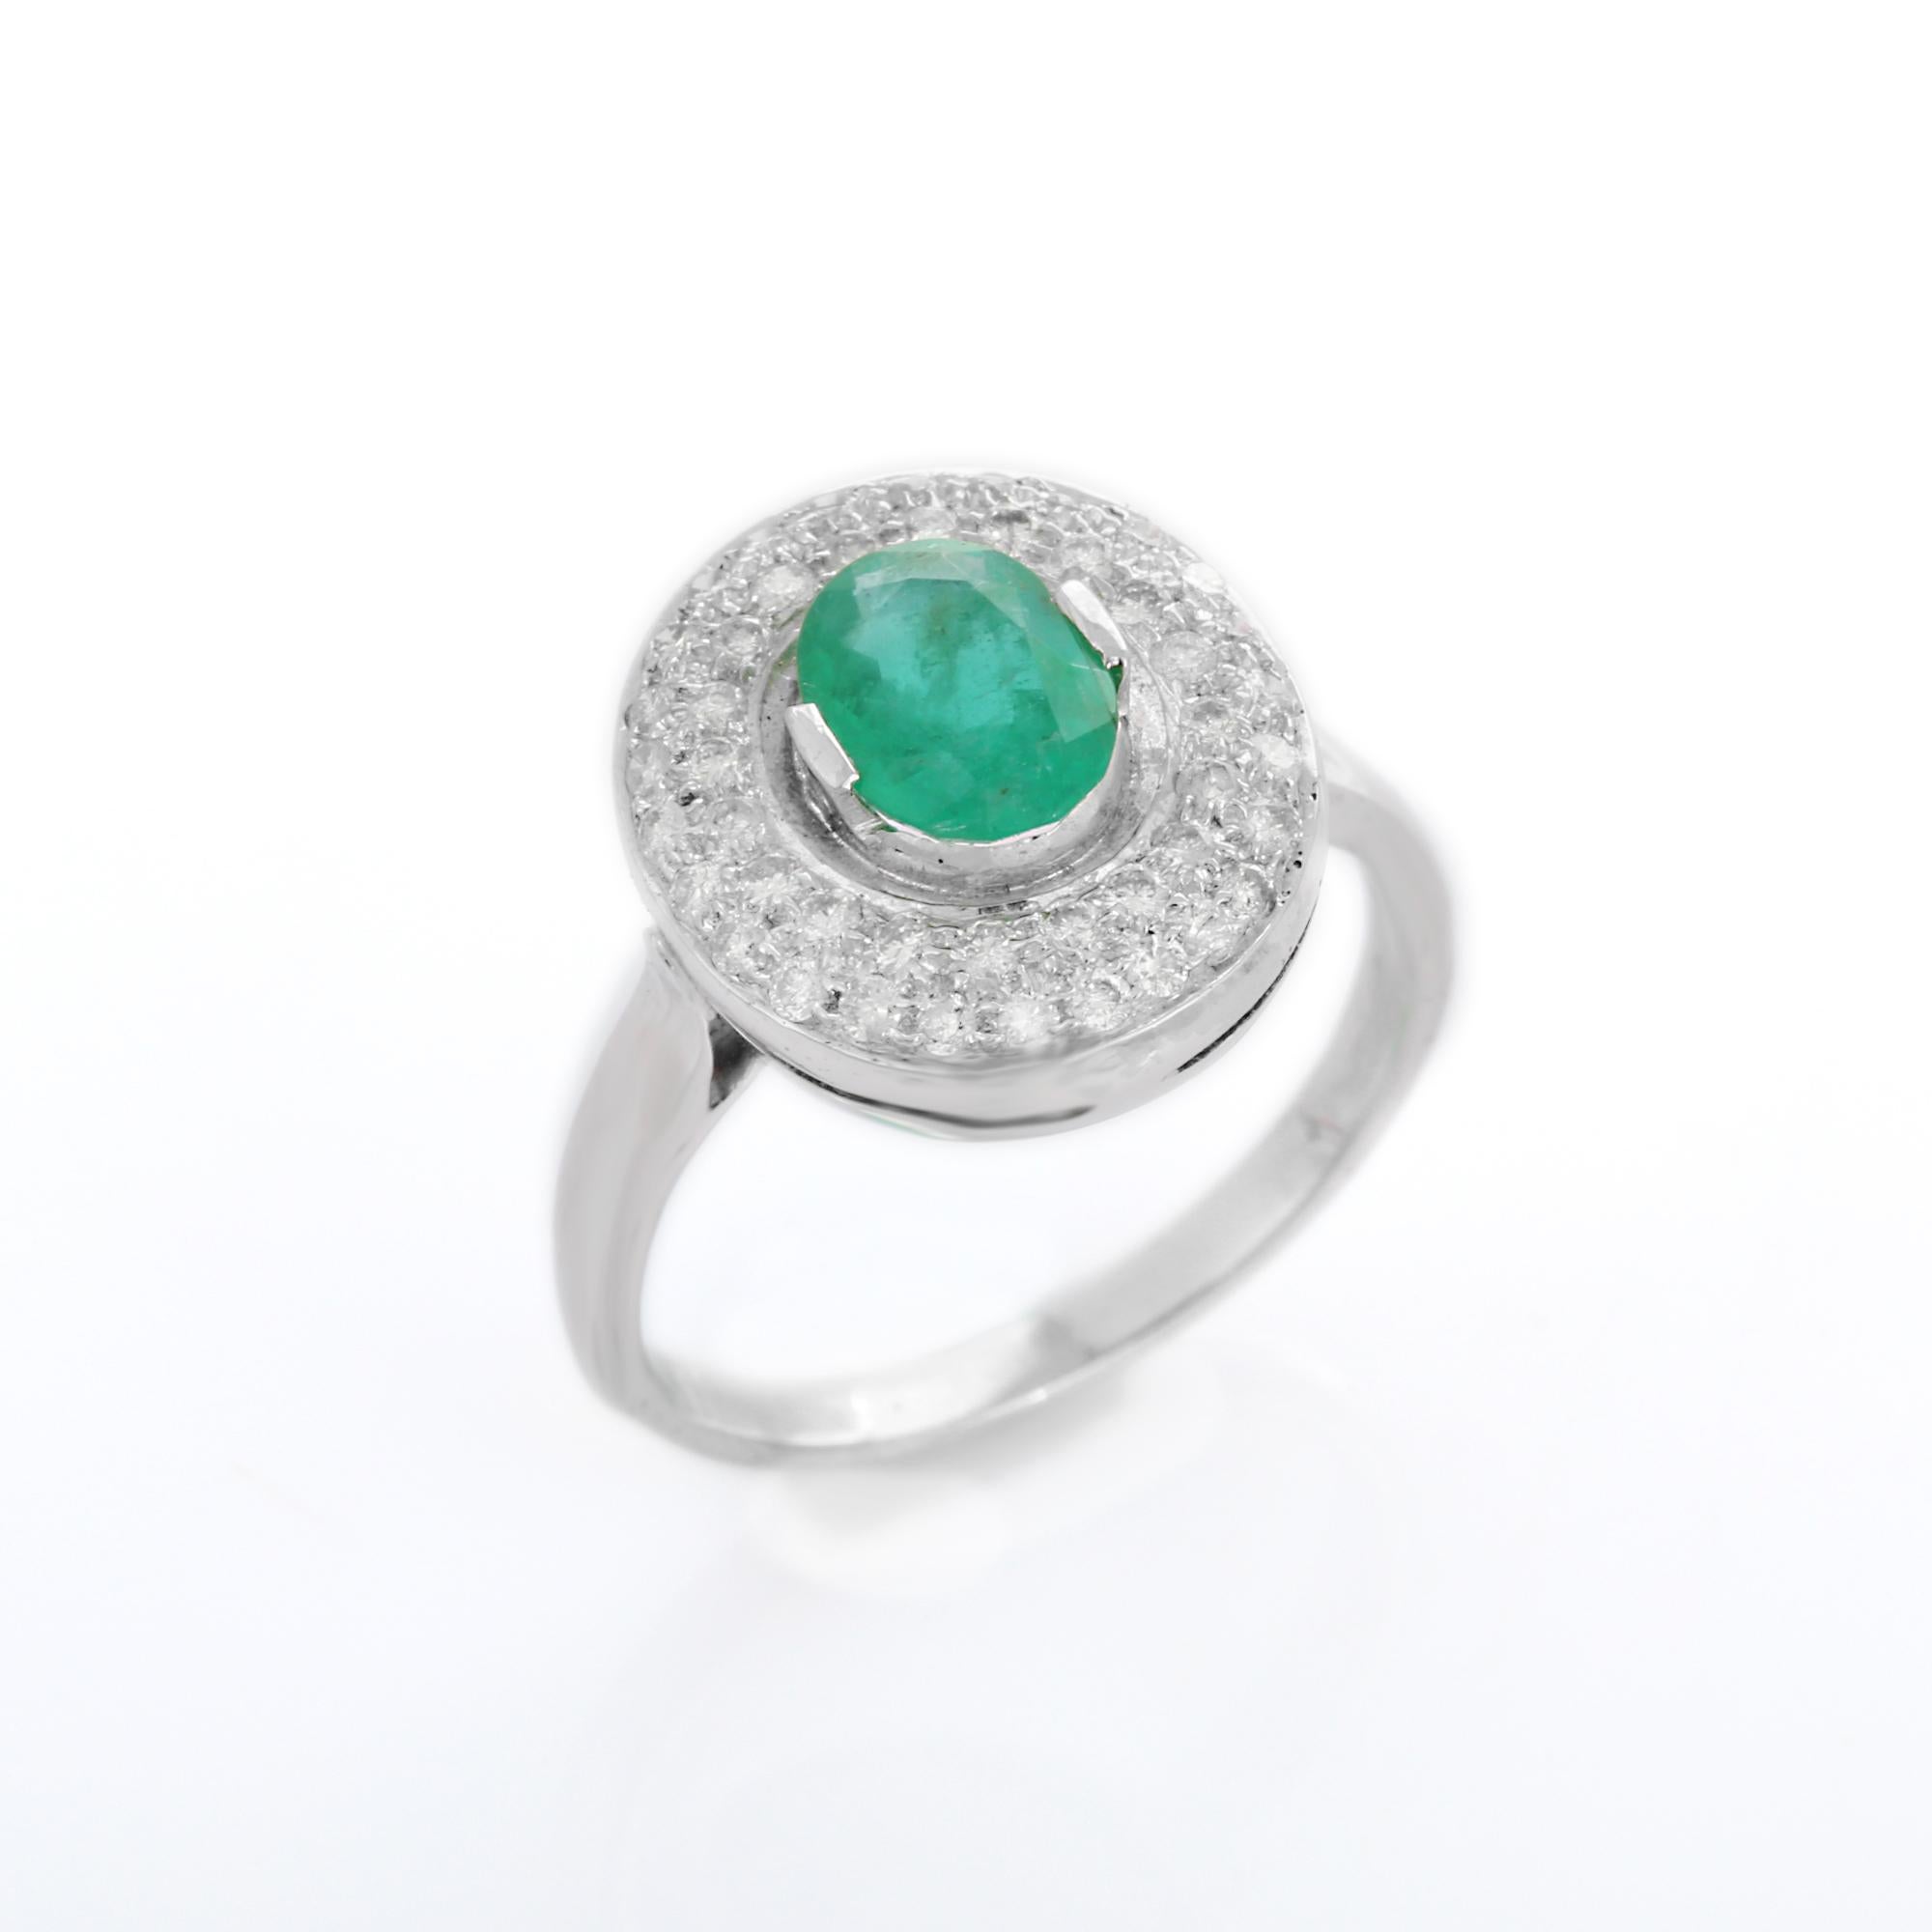 For Sale:  Big Emerald Cocktail Ring with Diamonds in 18K White Gold 3